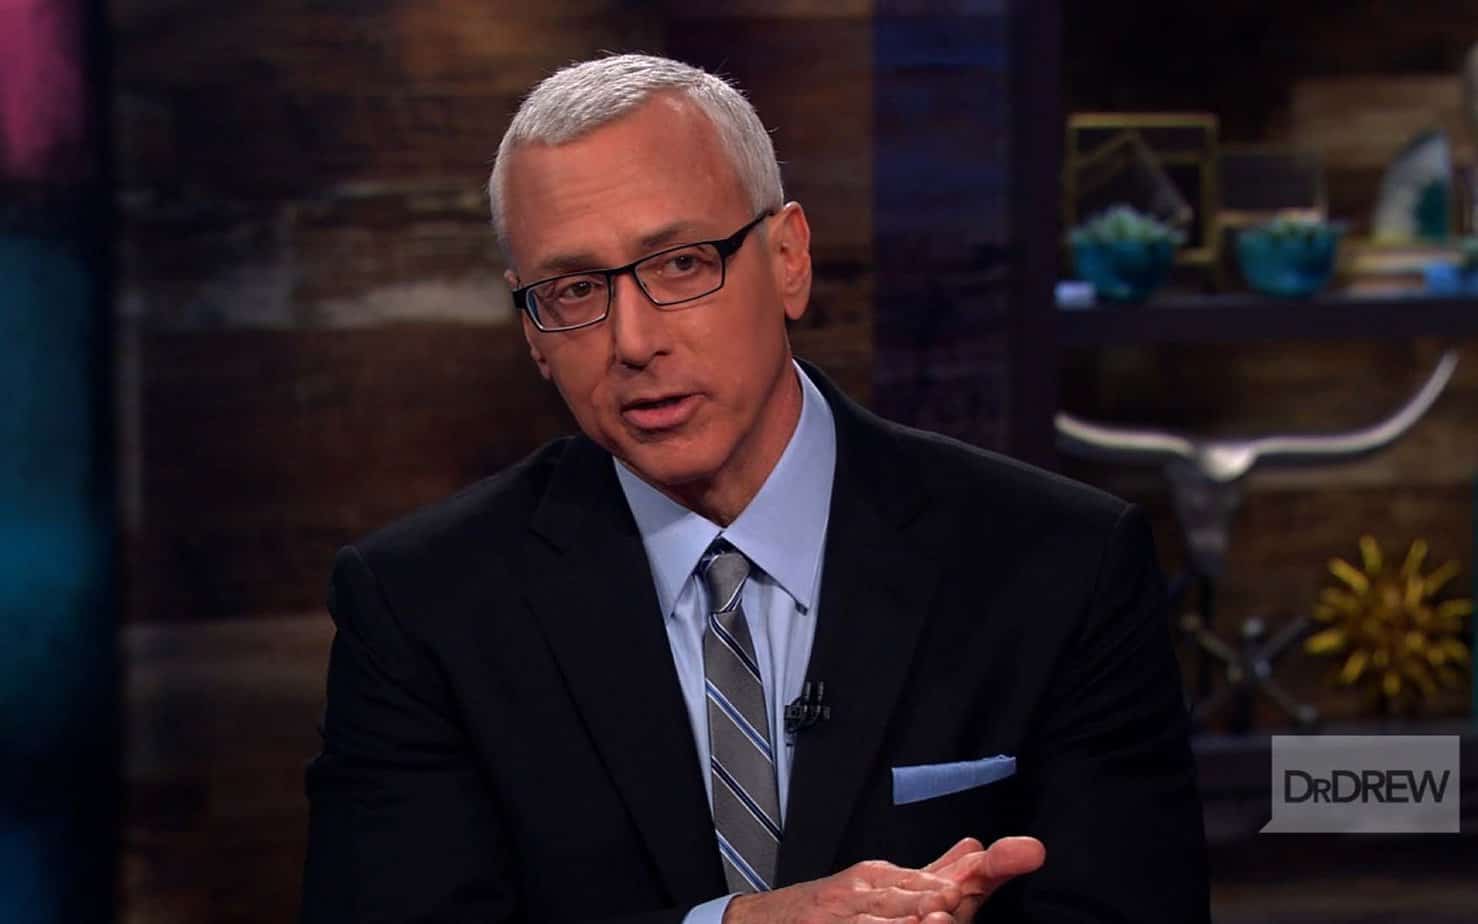 Dr. Drew Calls for Panic to End, Media to Be Held Accountable